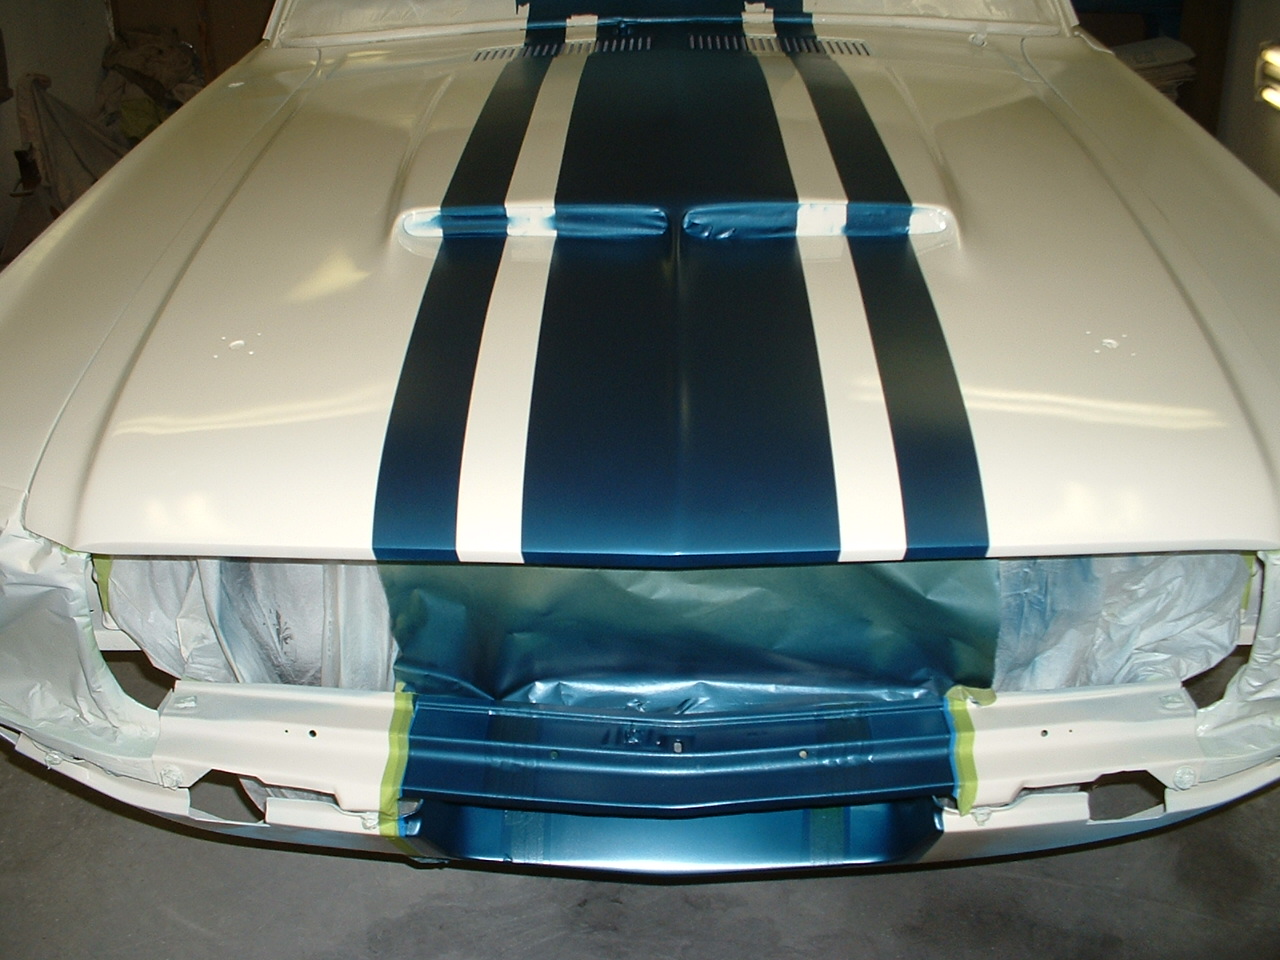 68_fastback_427_paint_032